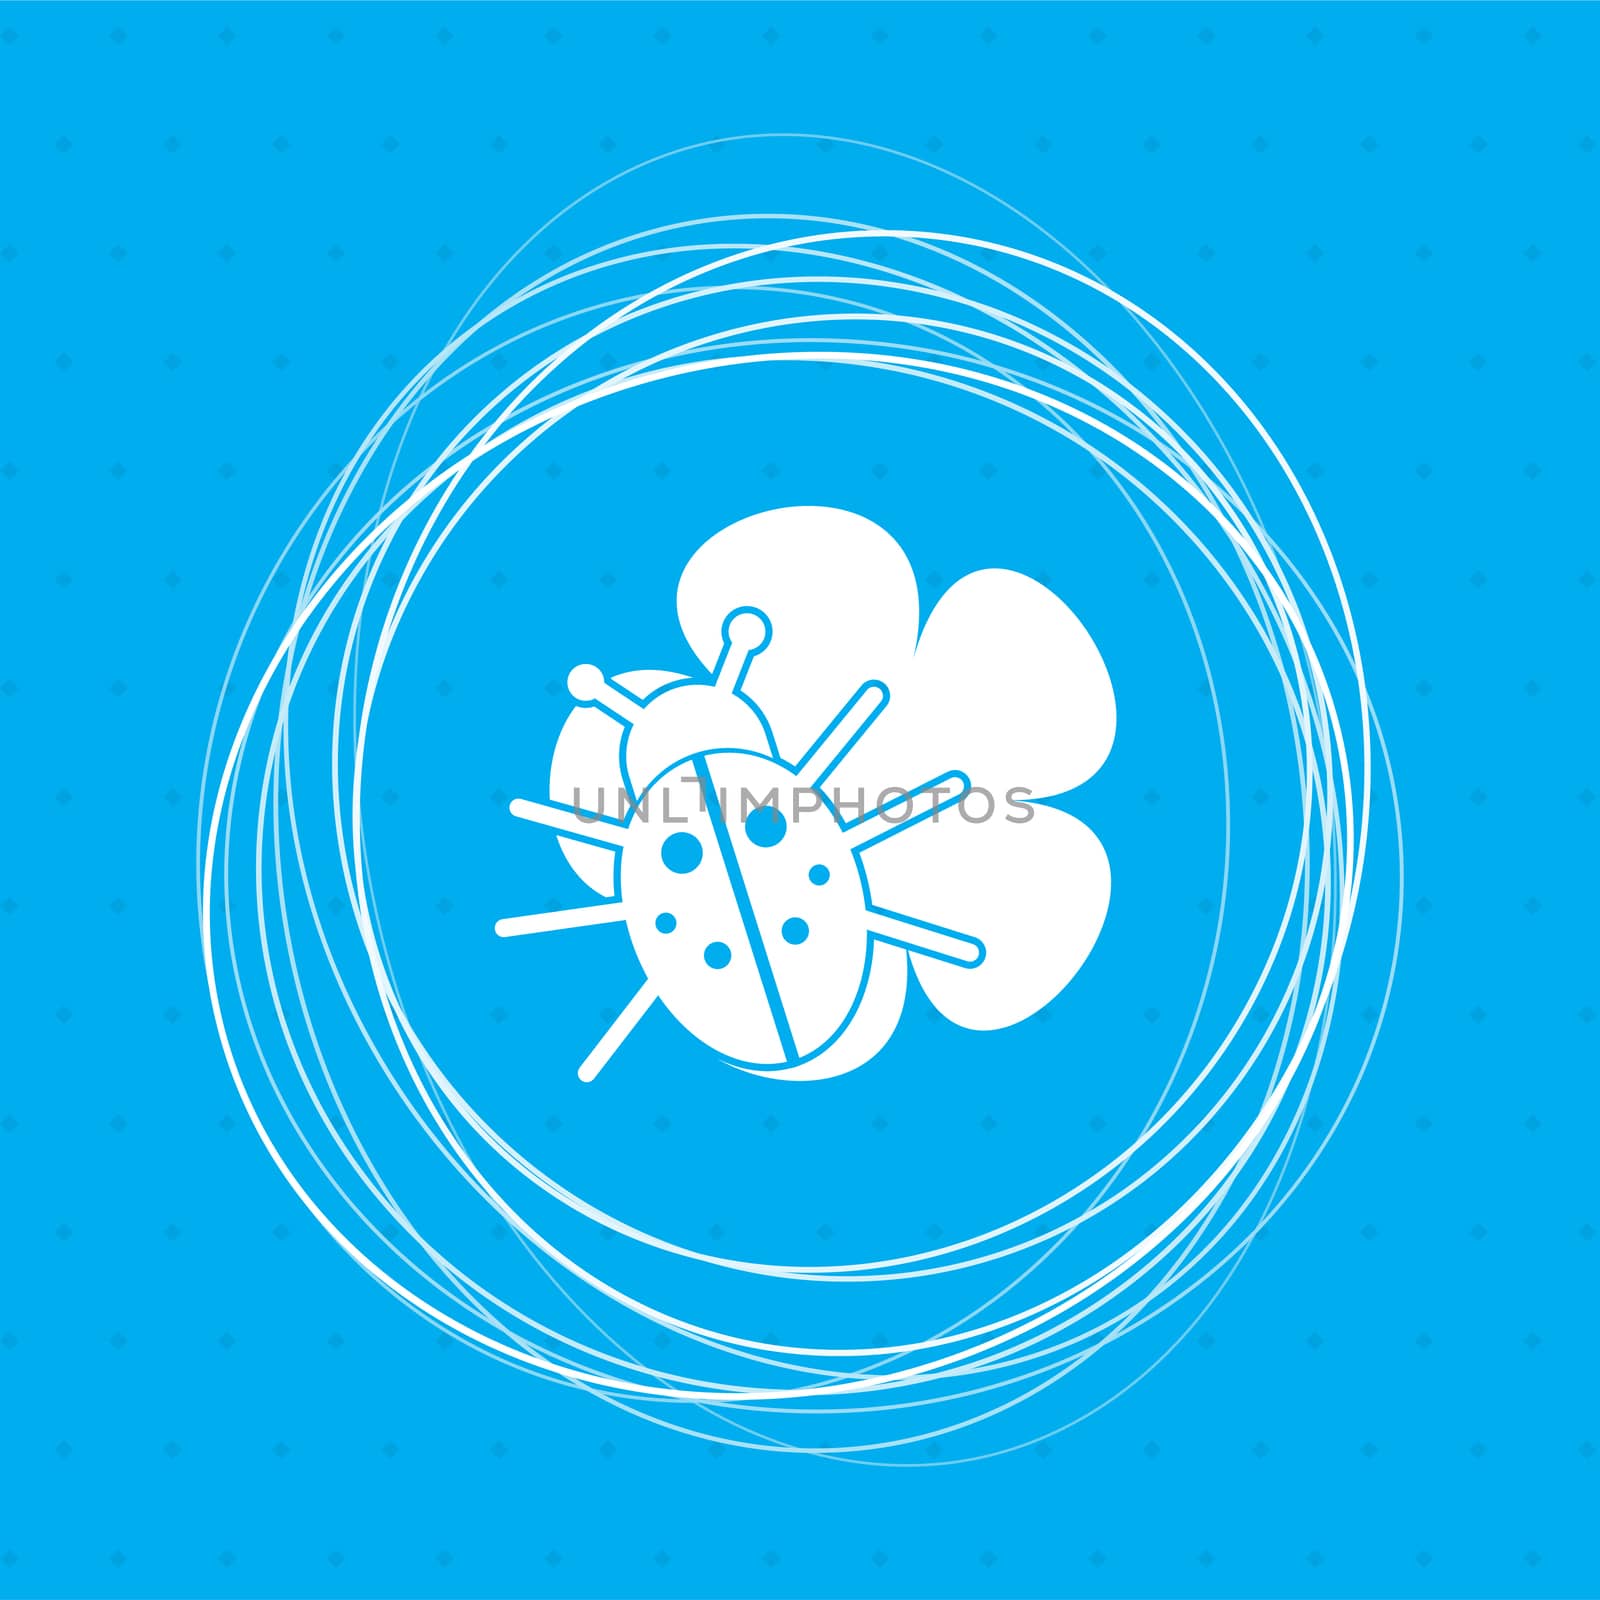 beetle on a leaf icon blue background with abstract circles around and place for your text.  by Adamchuk